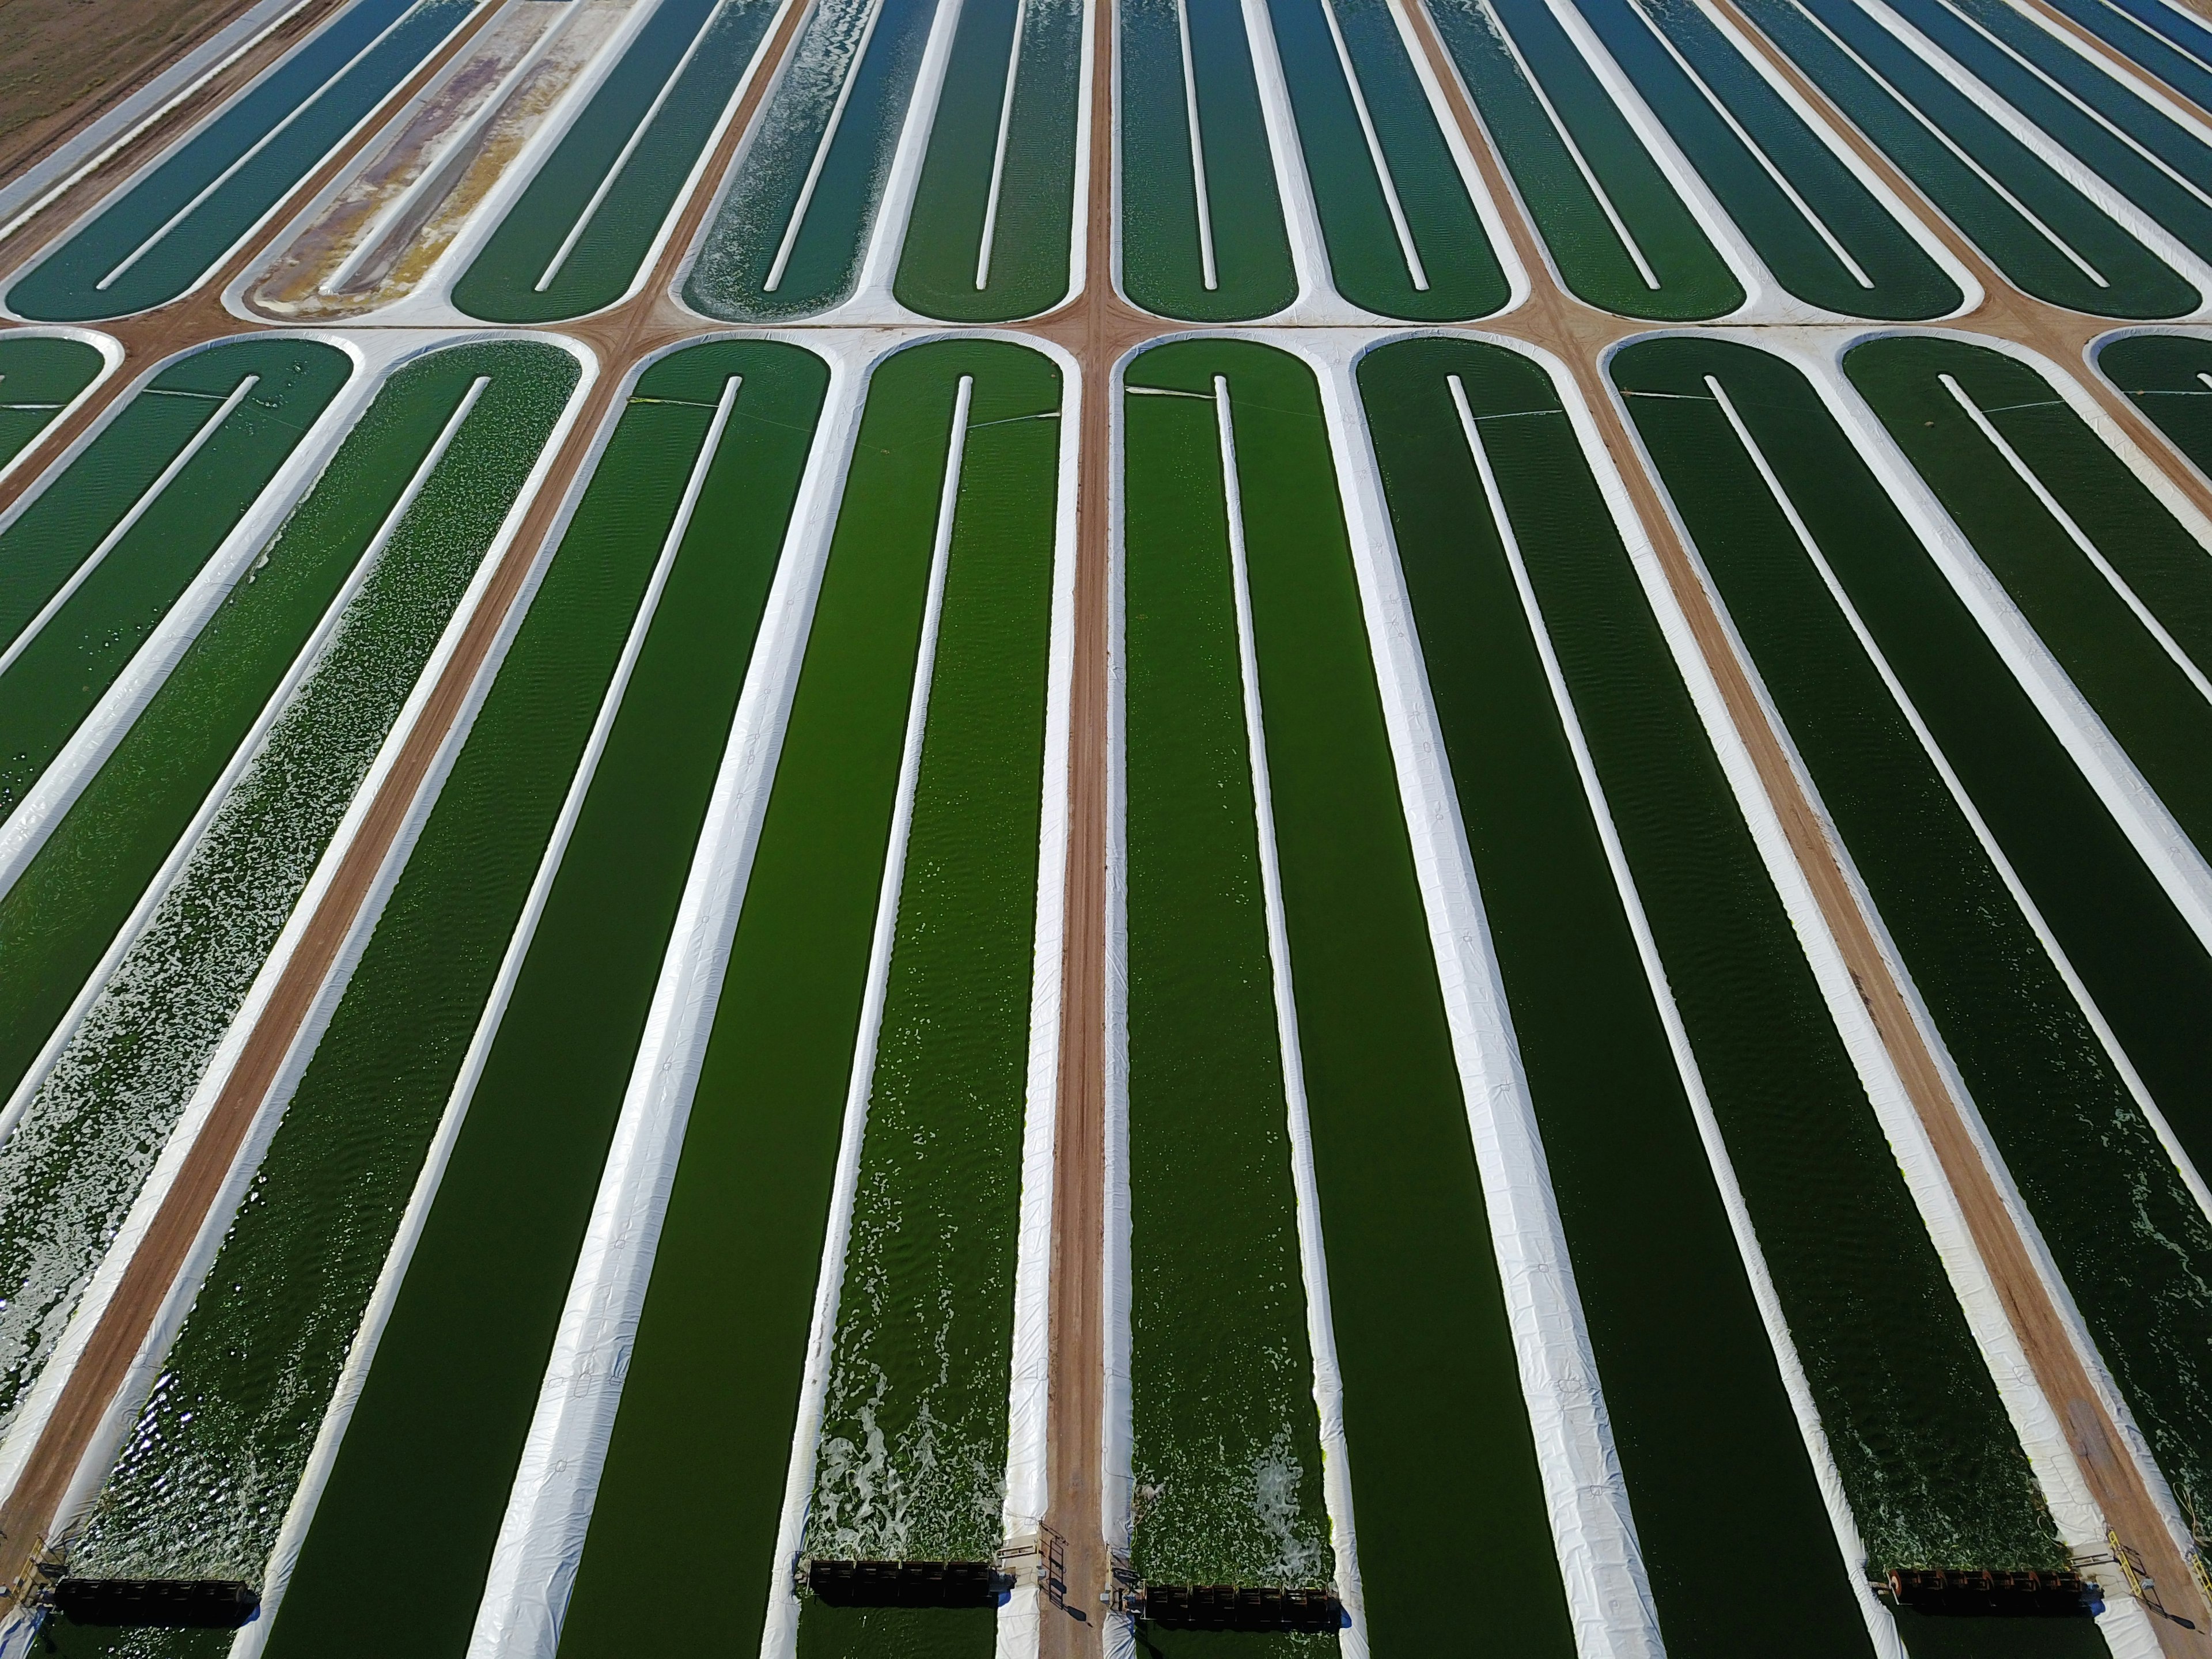 An aerial view of large pools of water used to grow Nannochloropsis, an edible algae.